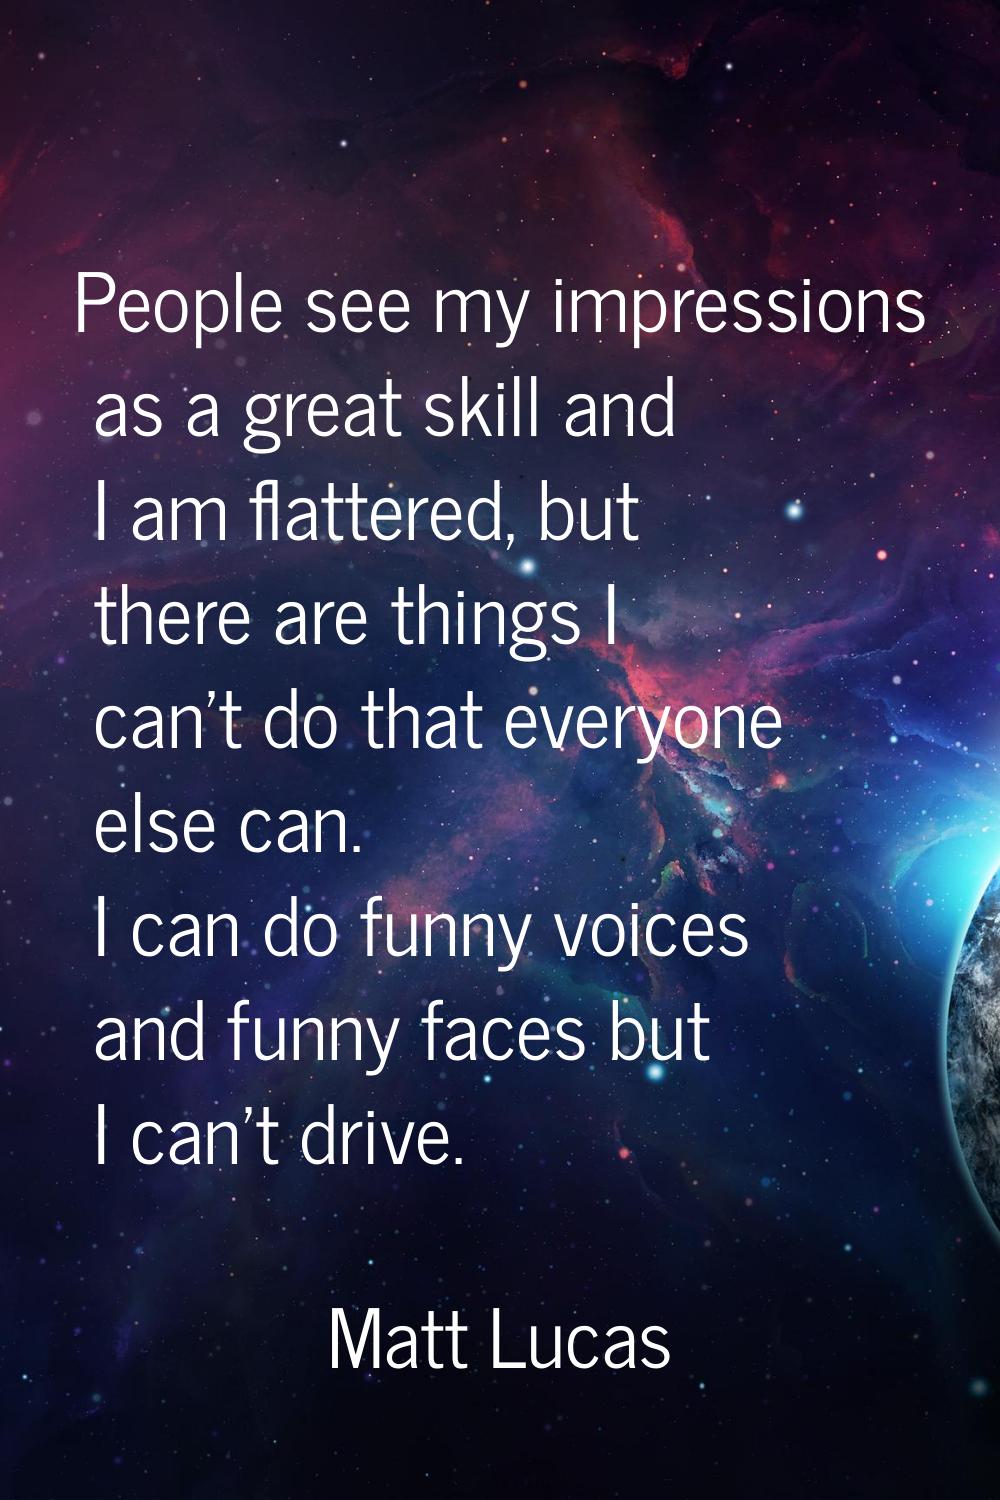 People see my impressions as a great skill and I am flattered, but there are things I can't do that